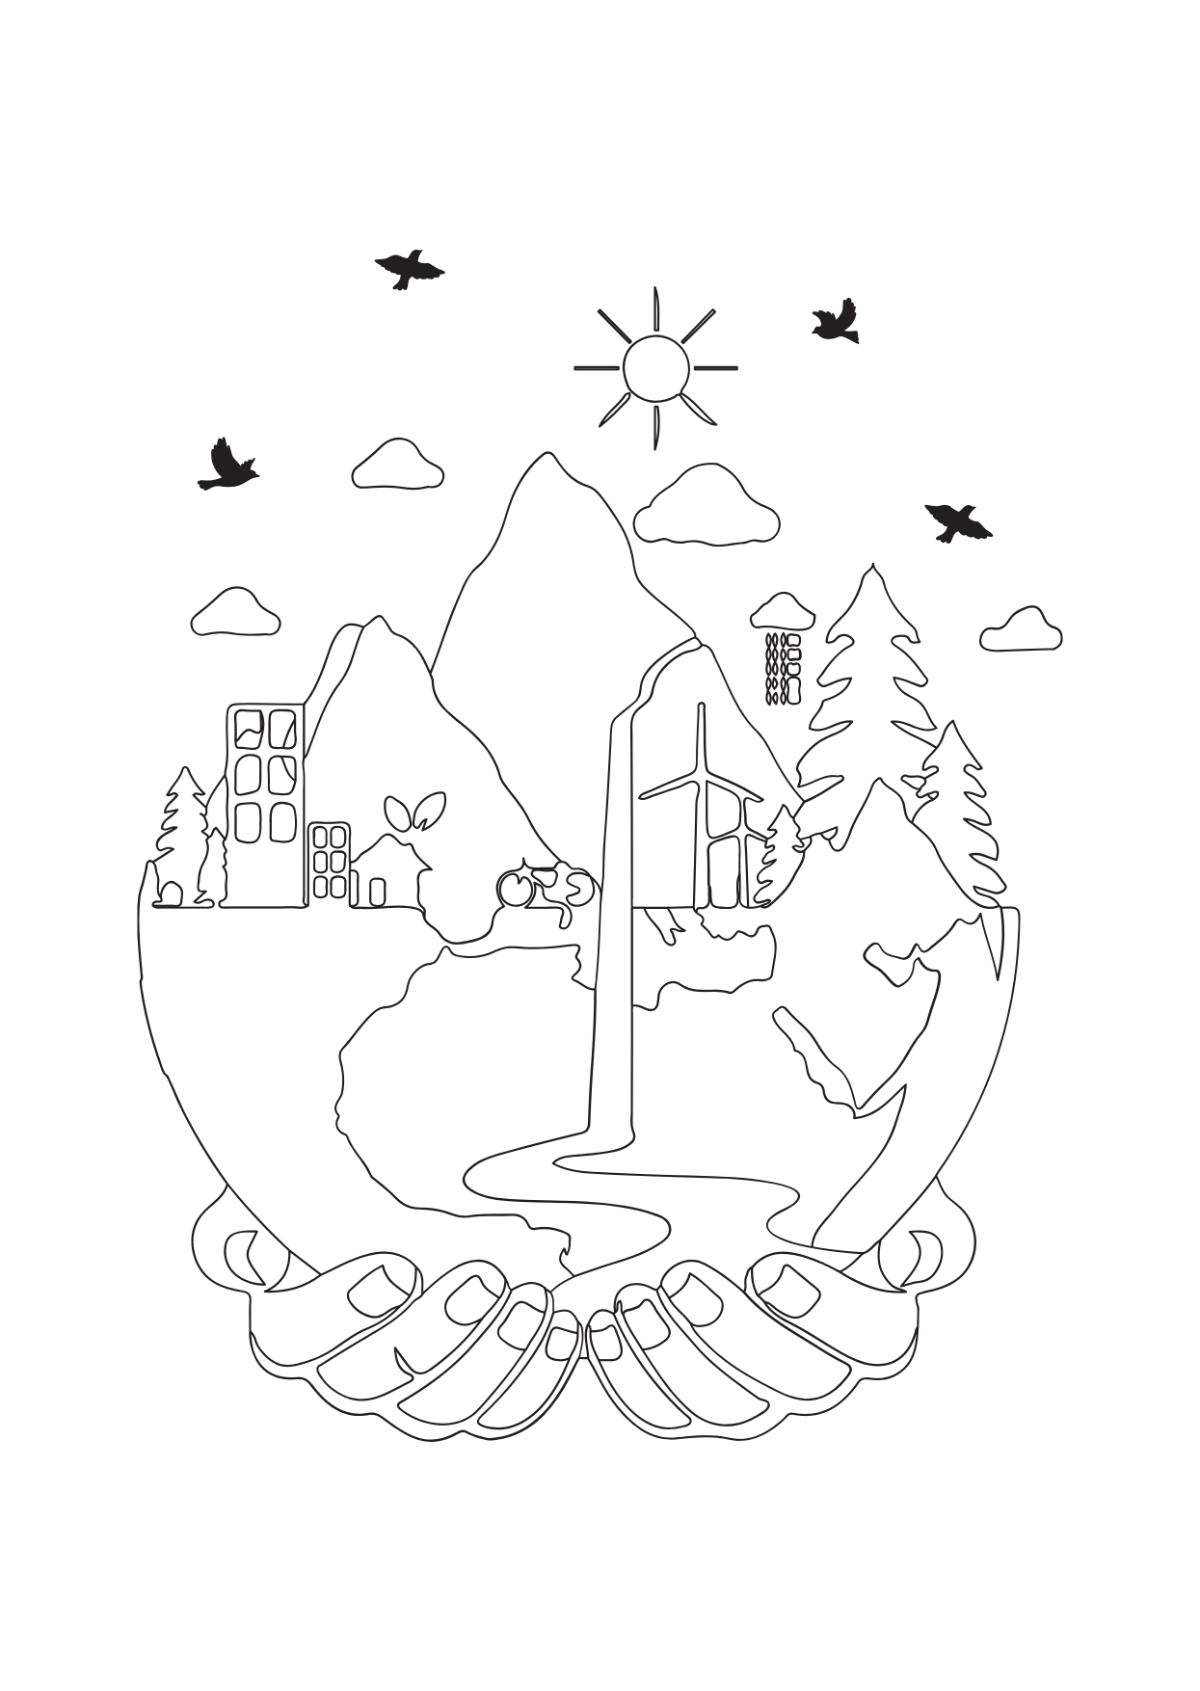 Free World Environment Day Drawing for Competition Template